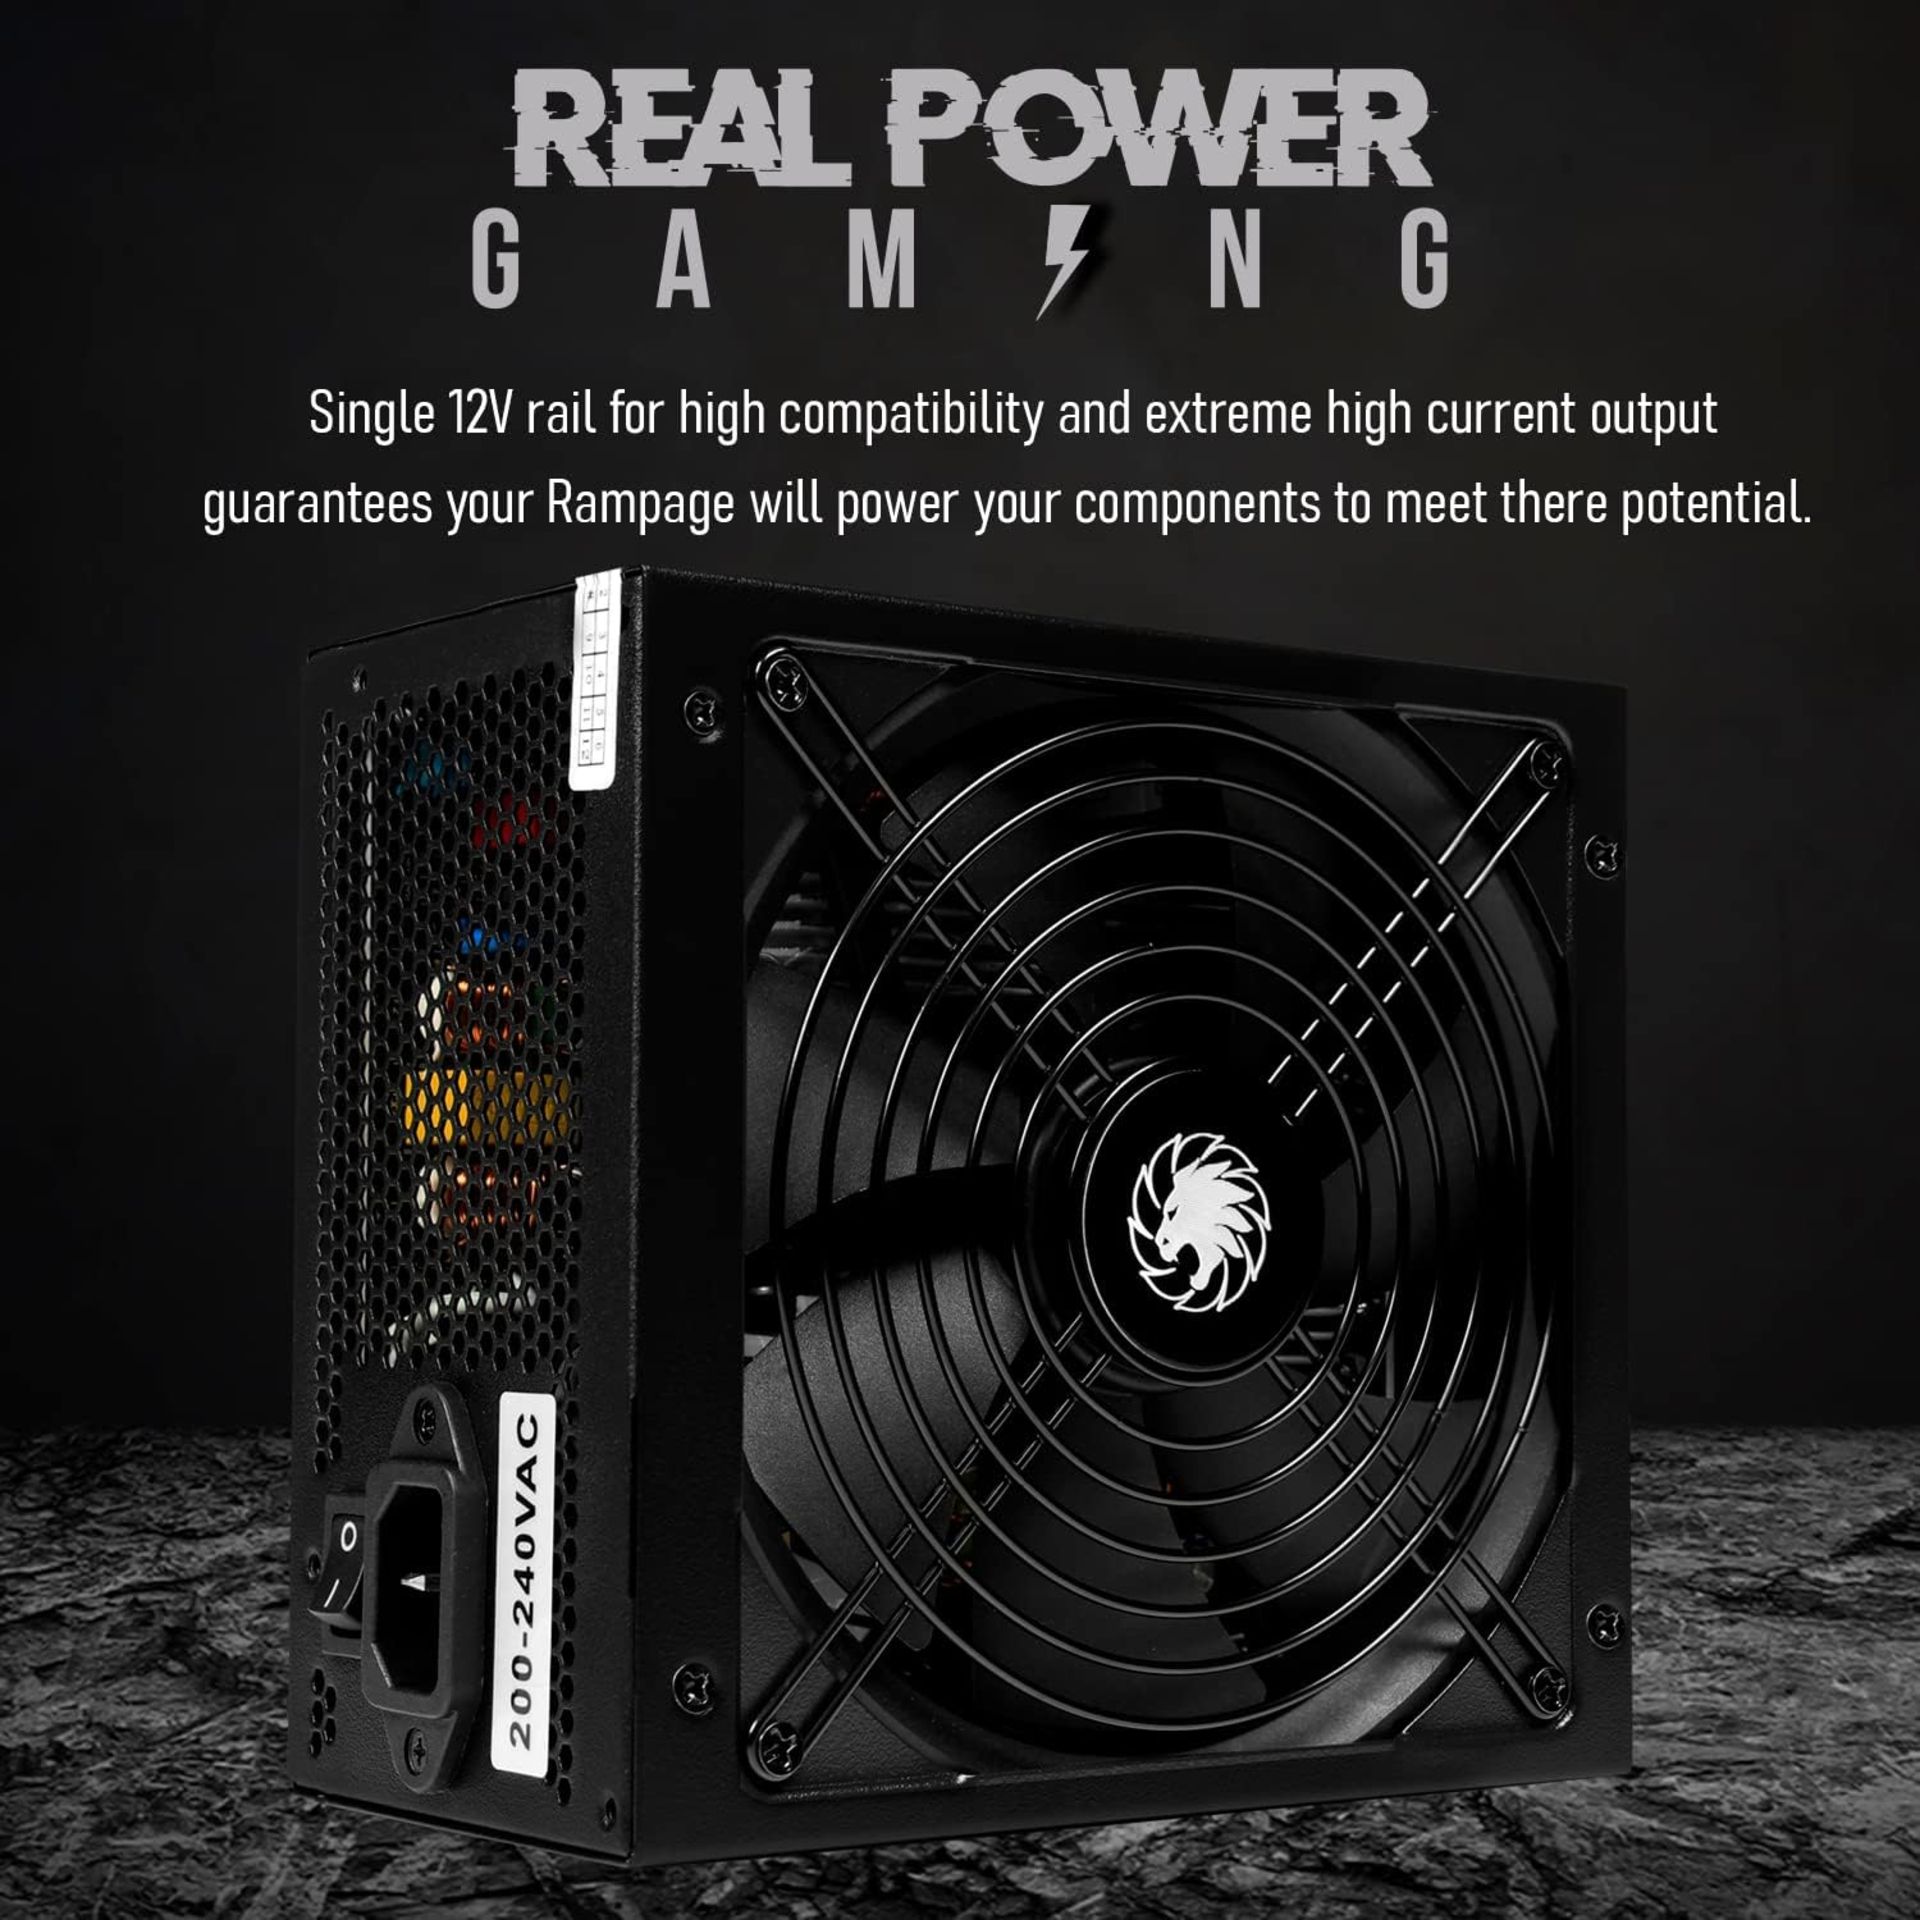 2x NEW & BOXED GAMEMAX Rampage 850w Power Supply. RRP £69.99 EACH. Semi-Modular - The 850W Rampage - Image 3 of 13